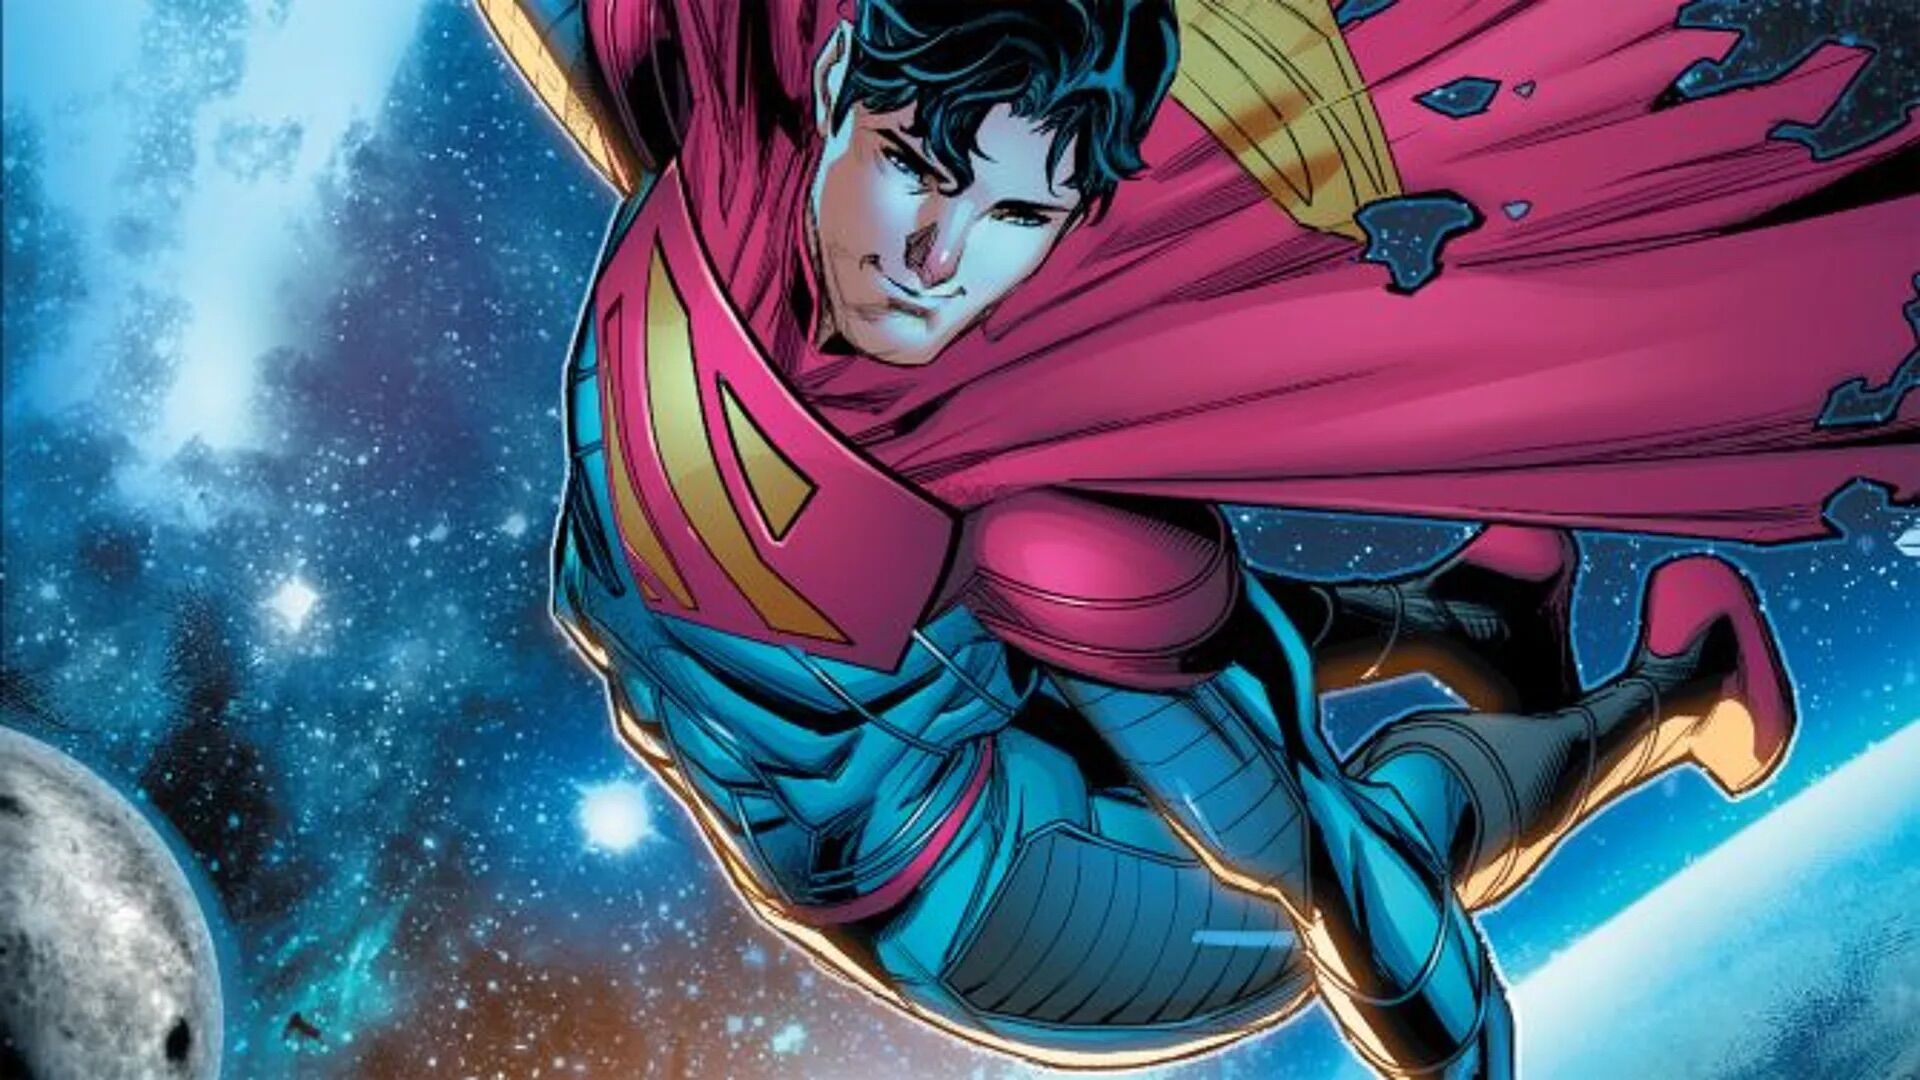 Superboy aka Jon Kent is about to get a promotion